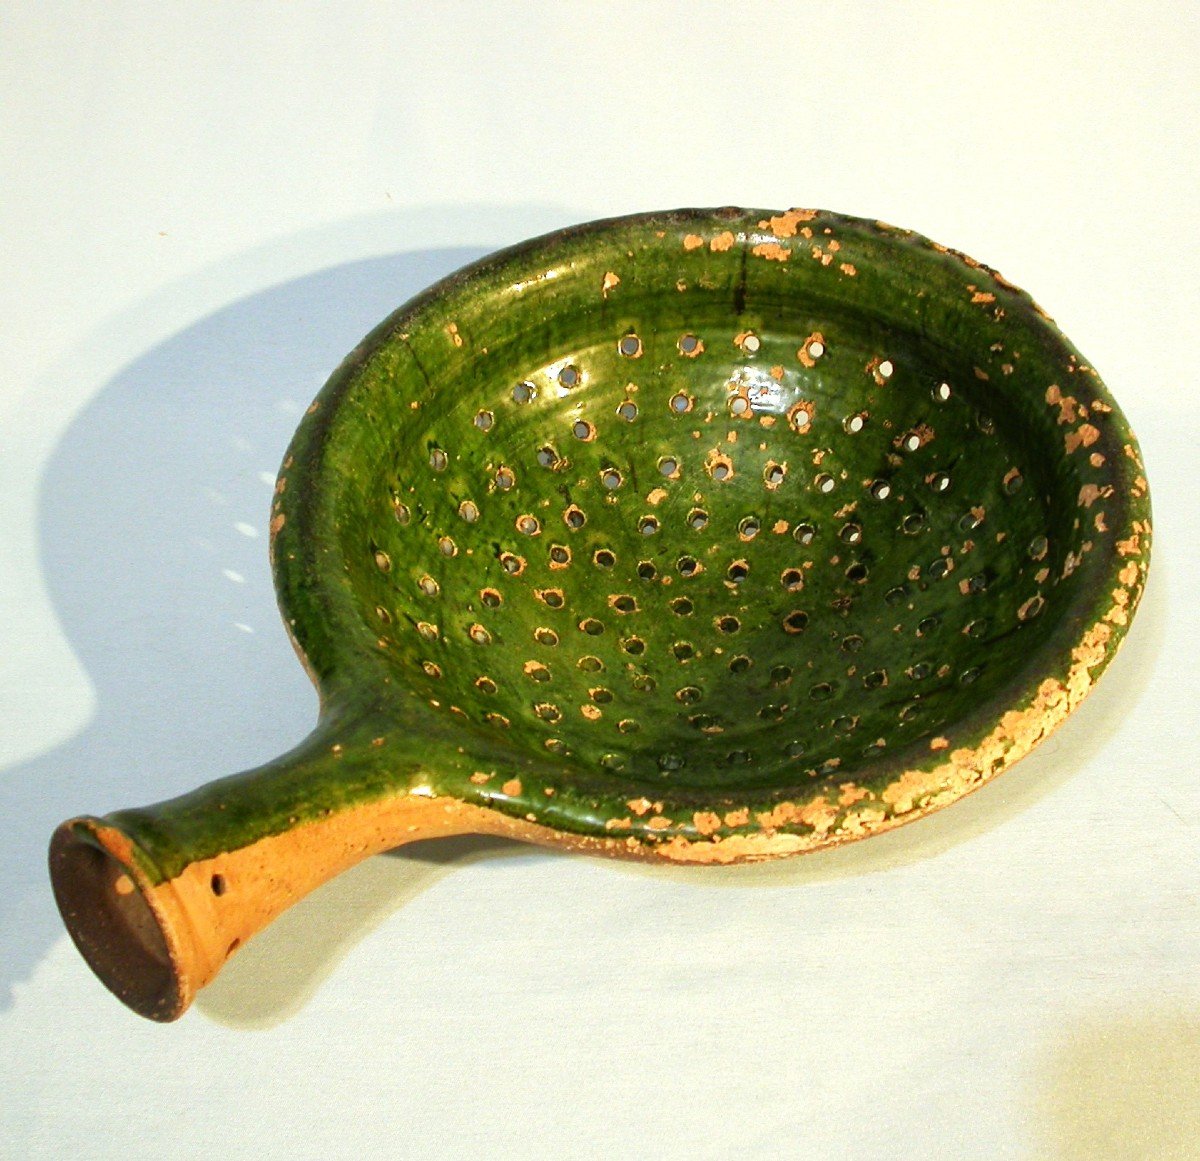 Varnished Earth Strainer - Manerbe Or Le Pre-d'auge, 18th Century-photo-1